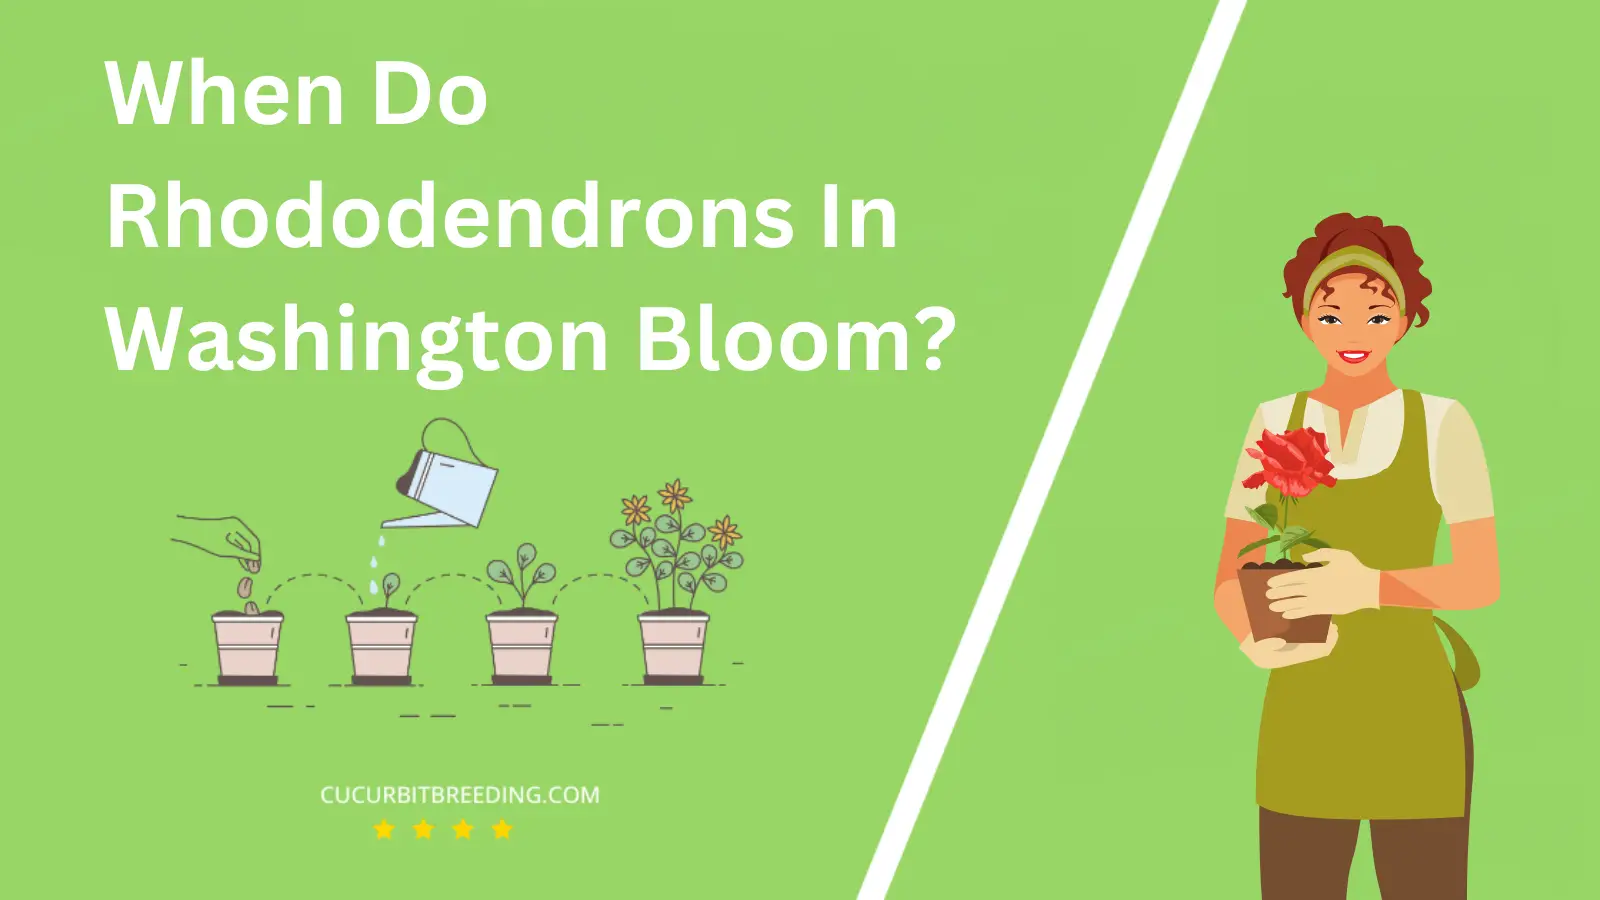 When Do Rhododendrons In Washington Bloom?